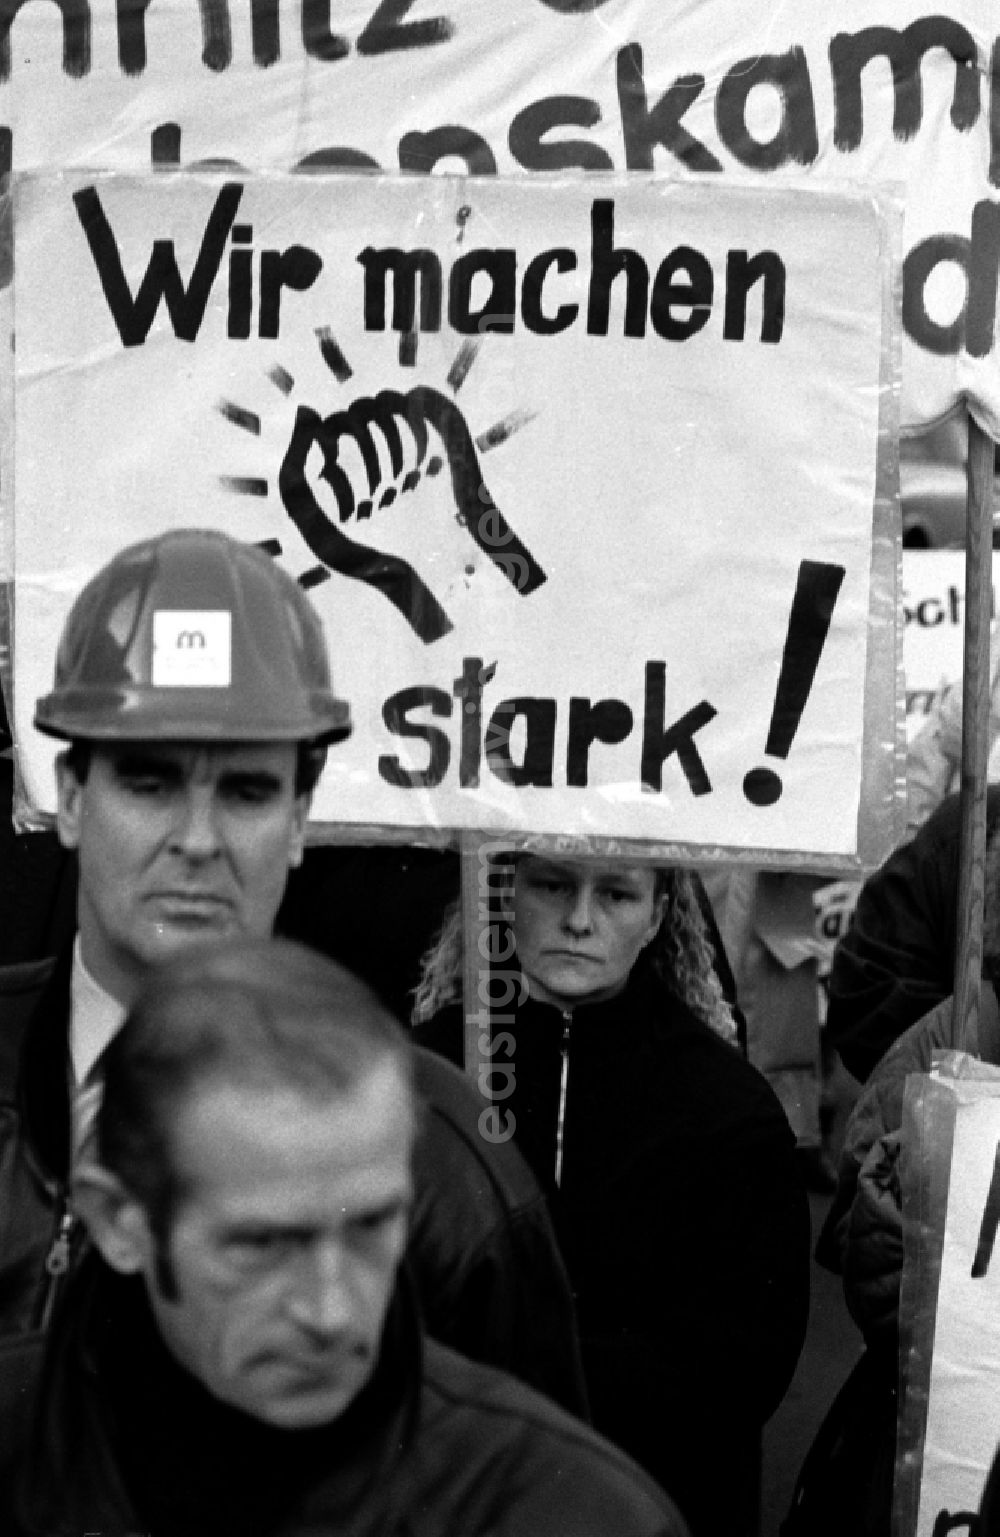 GDR photo archive: Berlin - Demonstration and street protest action before the trust headquarters at Wilhelmstrasse in Berlin, the former capital of the GDR, German Democratic Republic